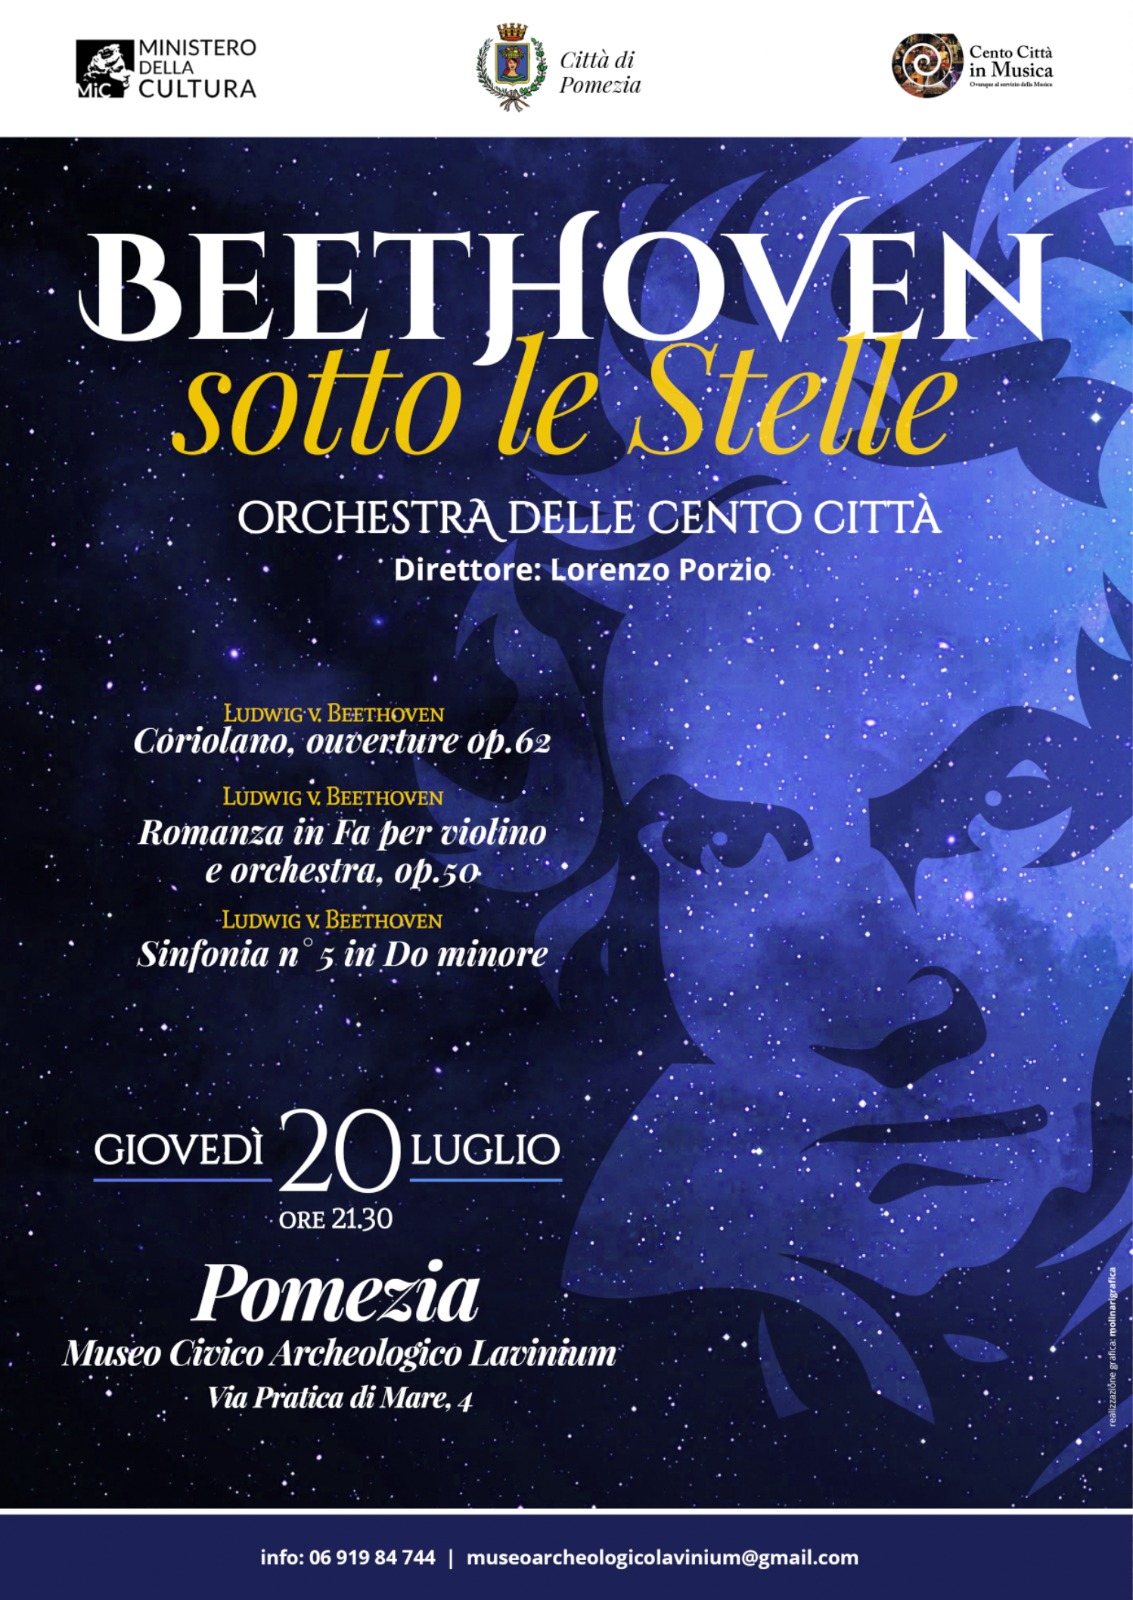 Beethoven sotto le stelle